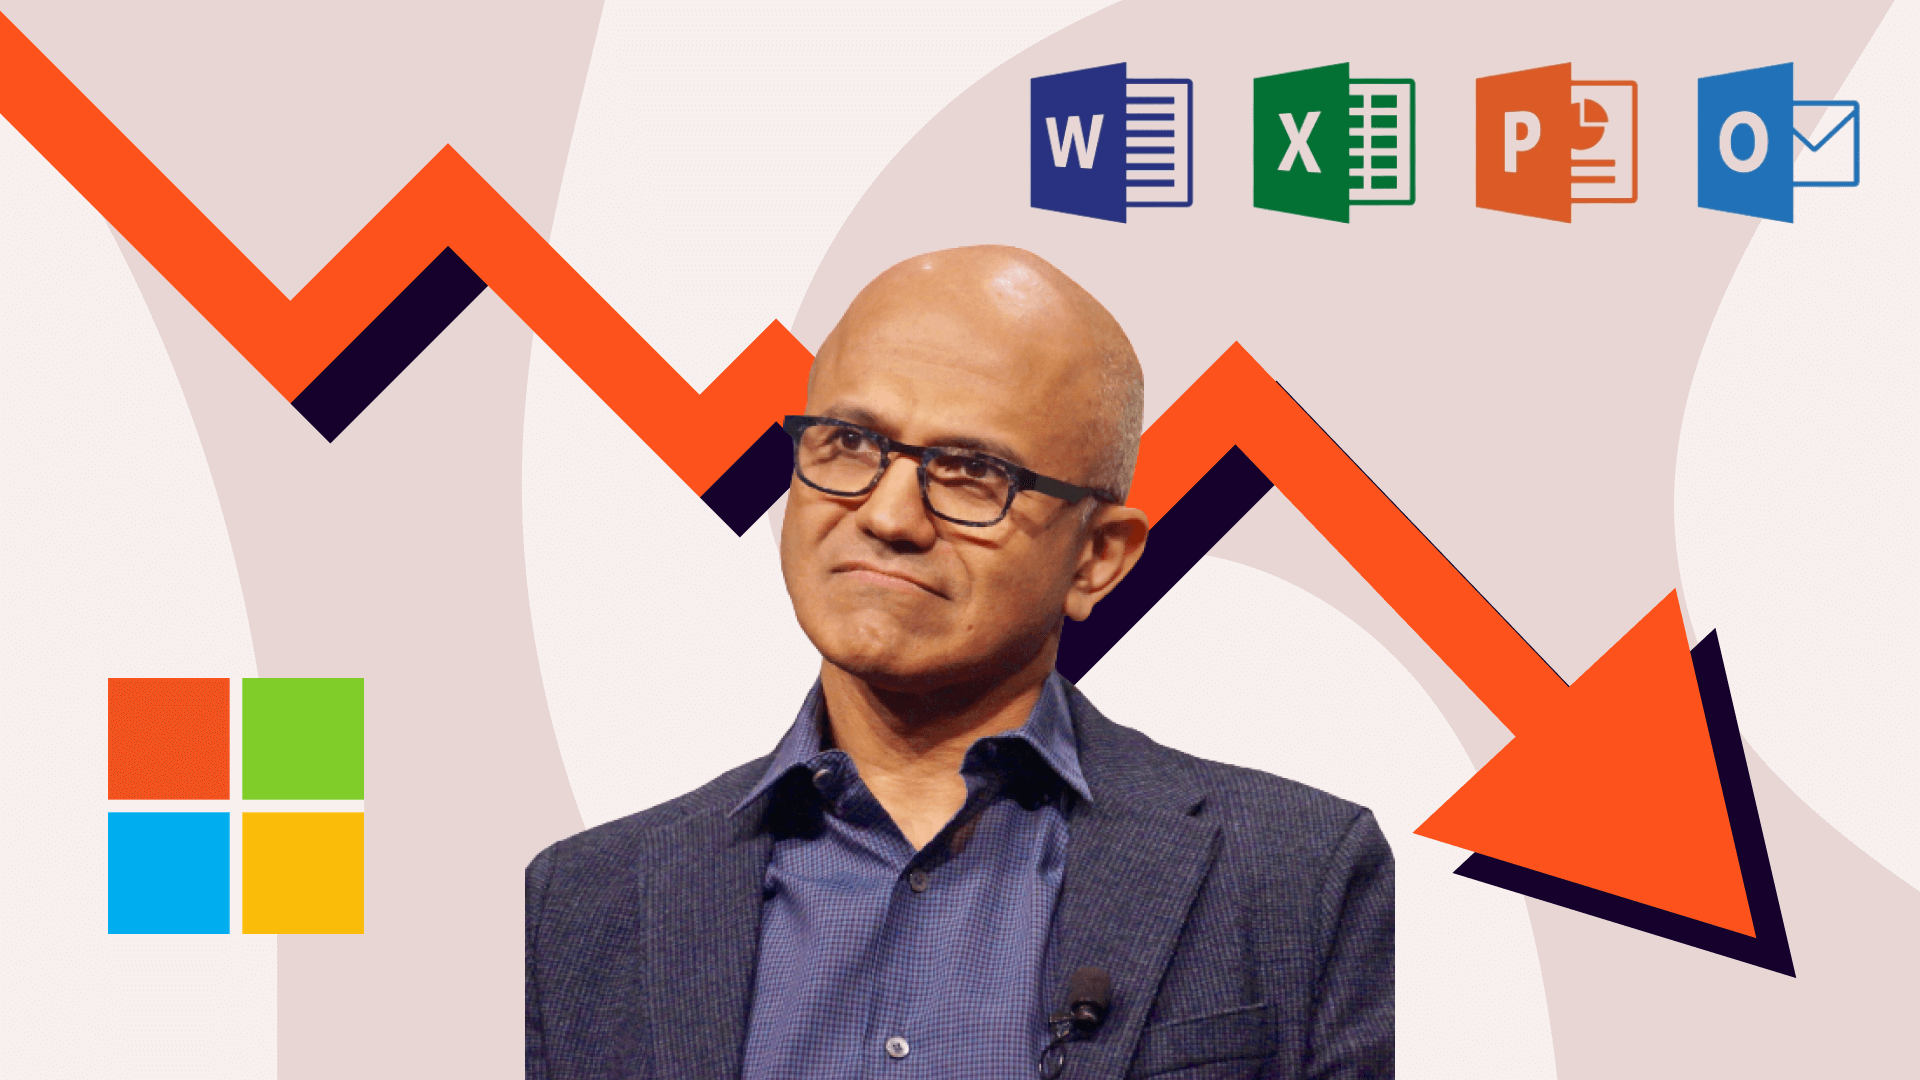 Why are Microsoft making lay-offs?